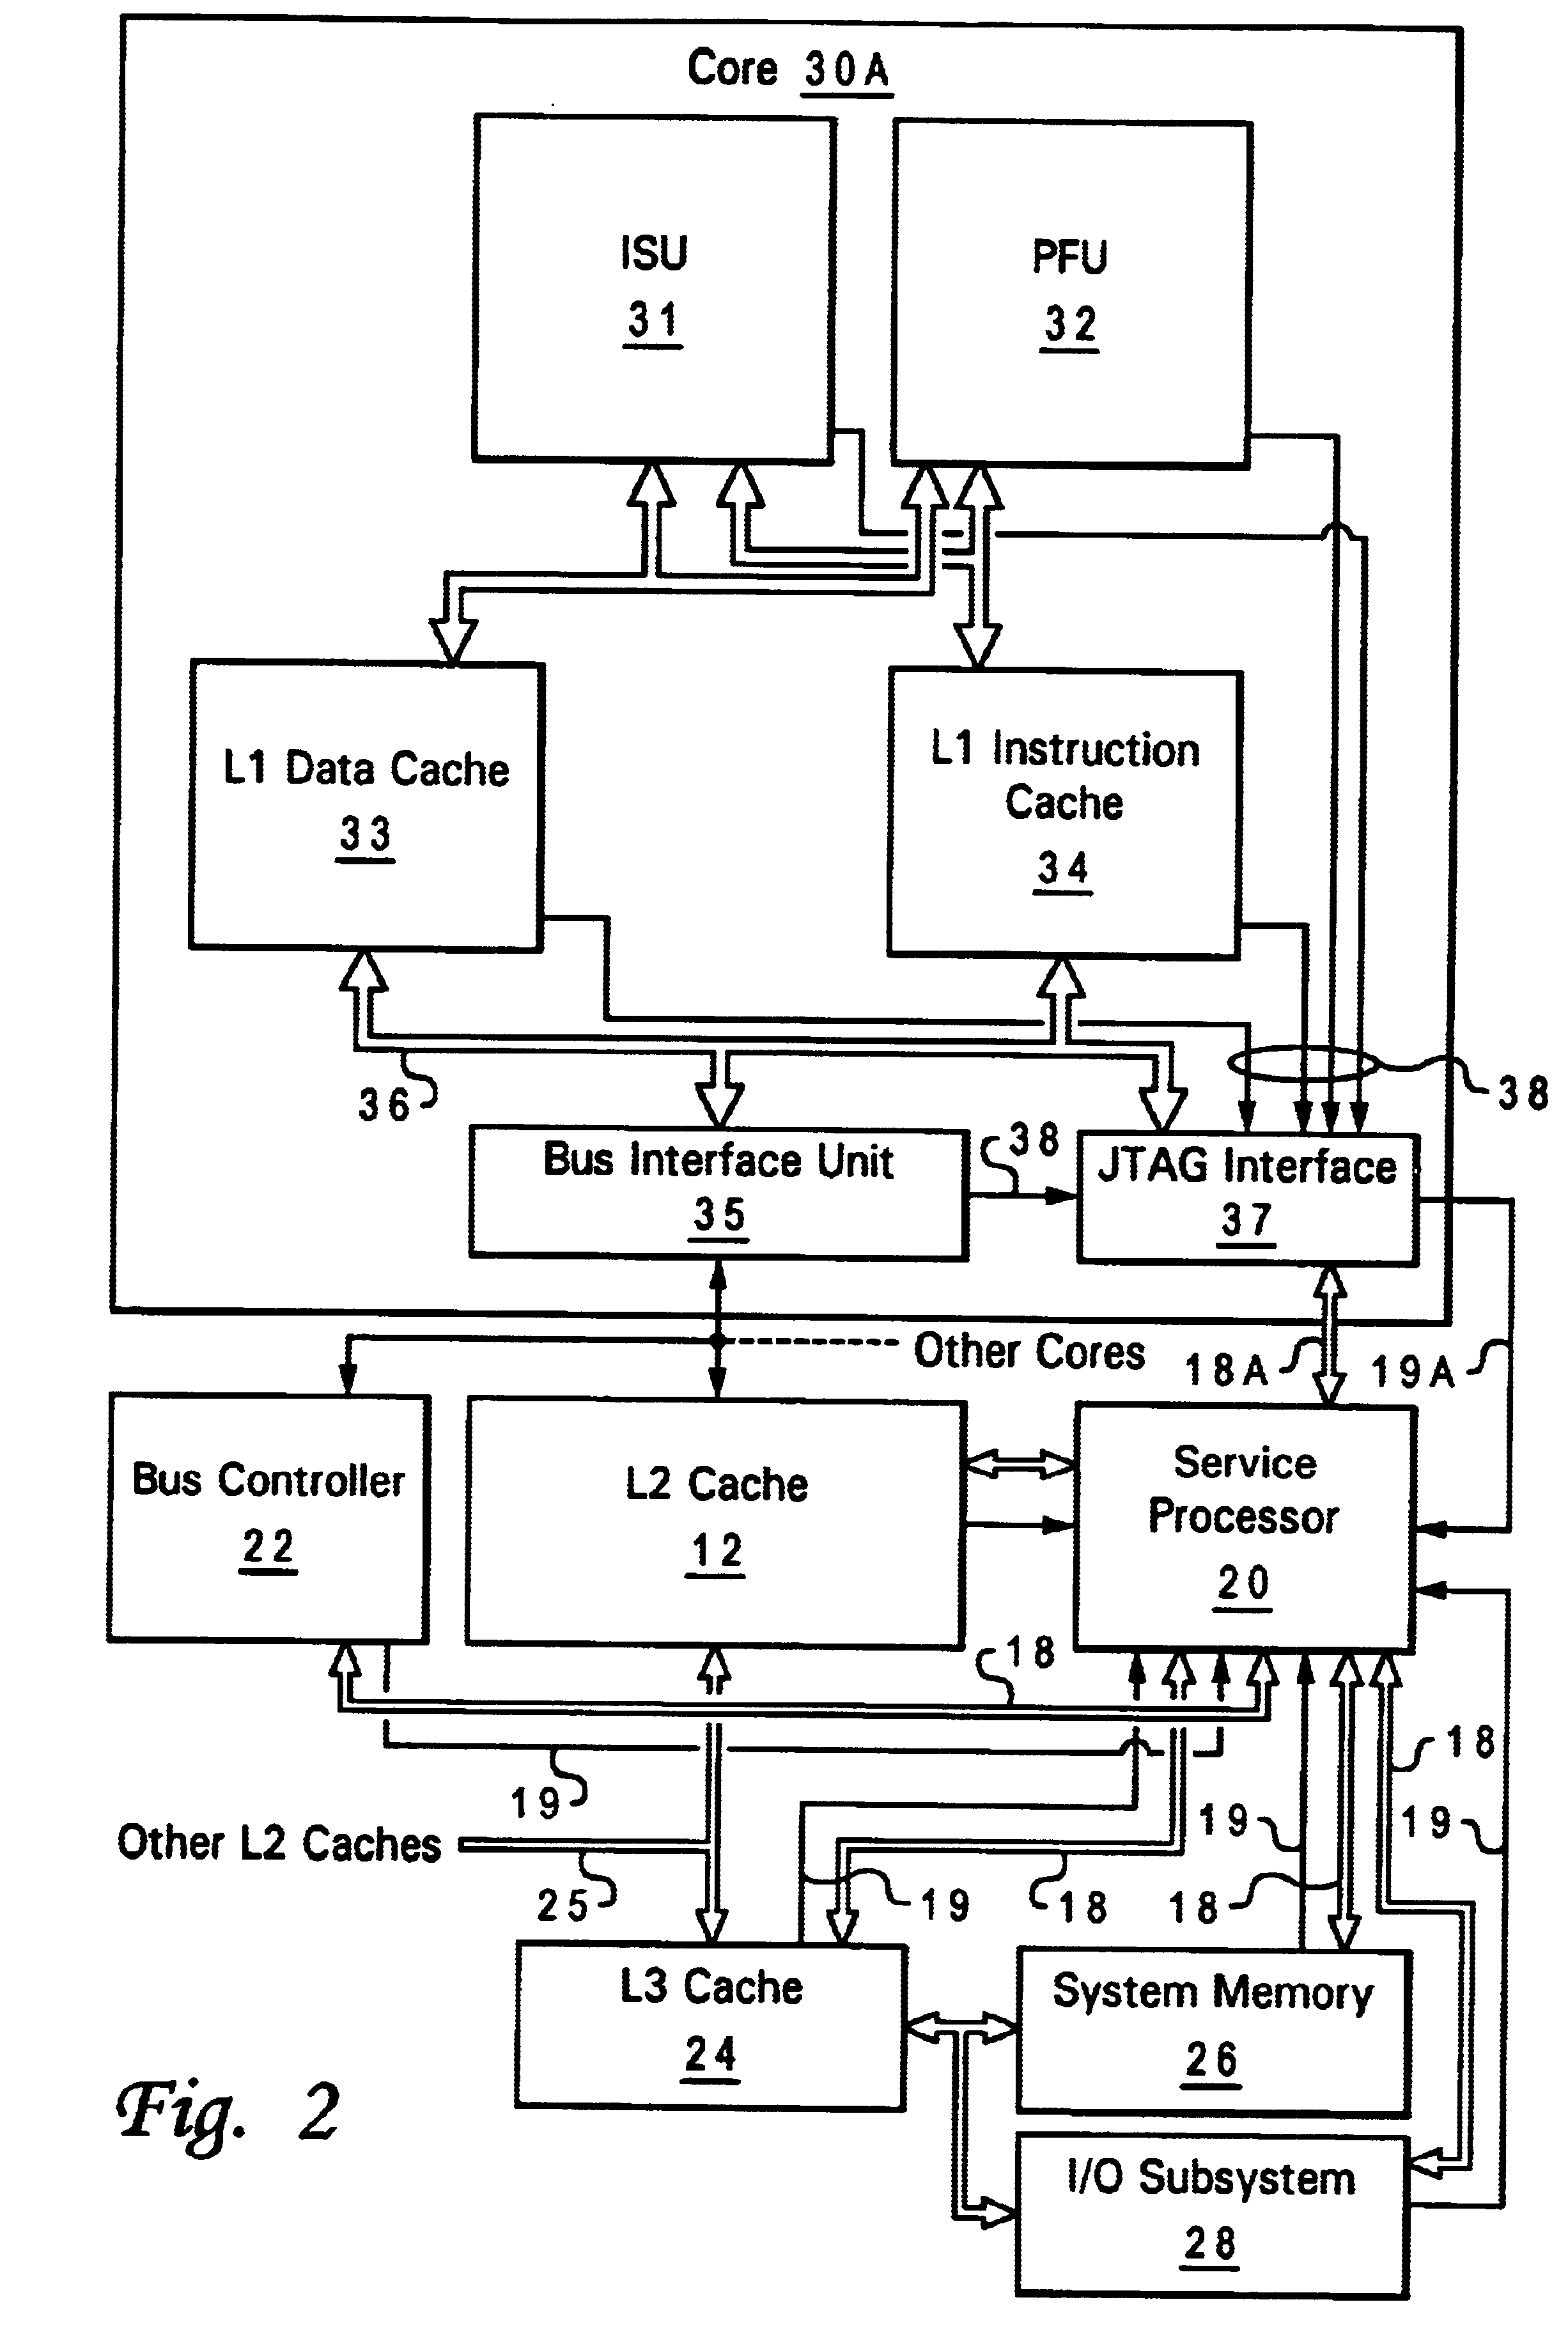 Method and apparatus for servicing a processing system through a test port